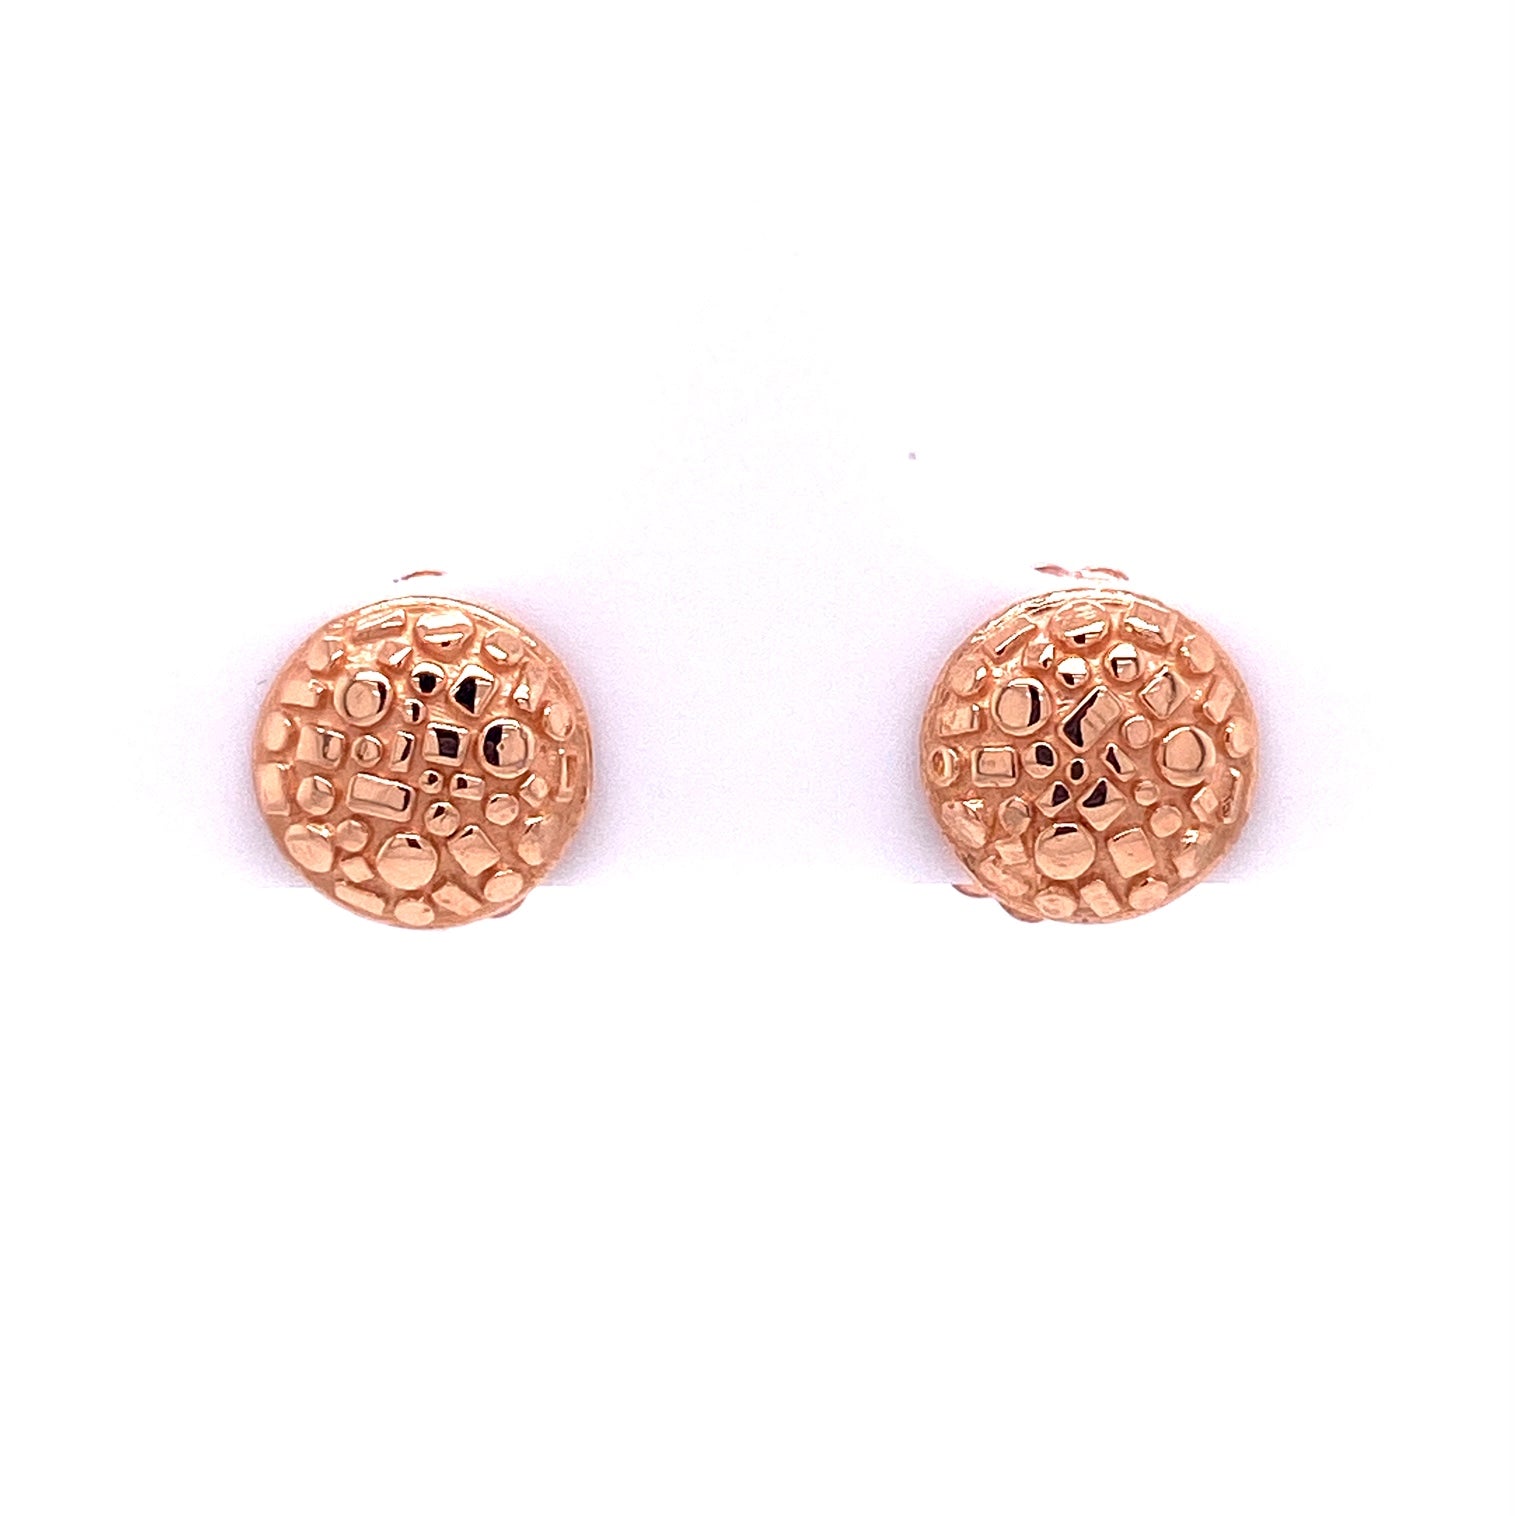 Custom Jewelry, 18k rose gold bits and pieces studs, llyn strong, Greenville, South Carolina